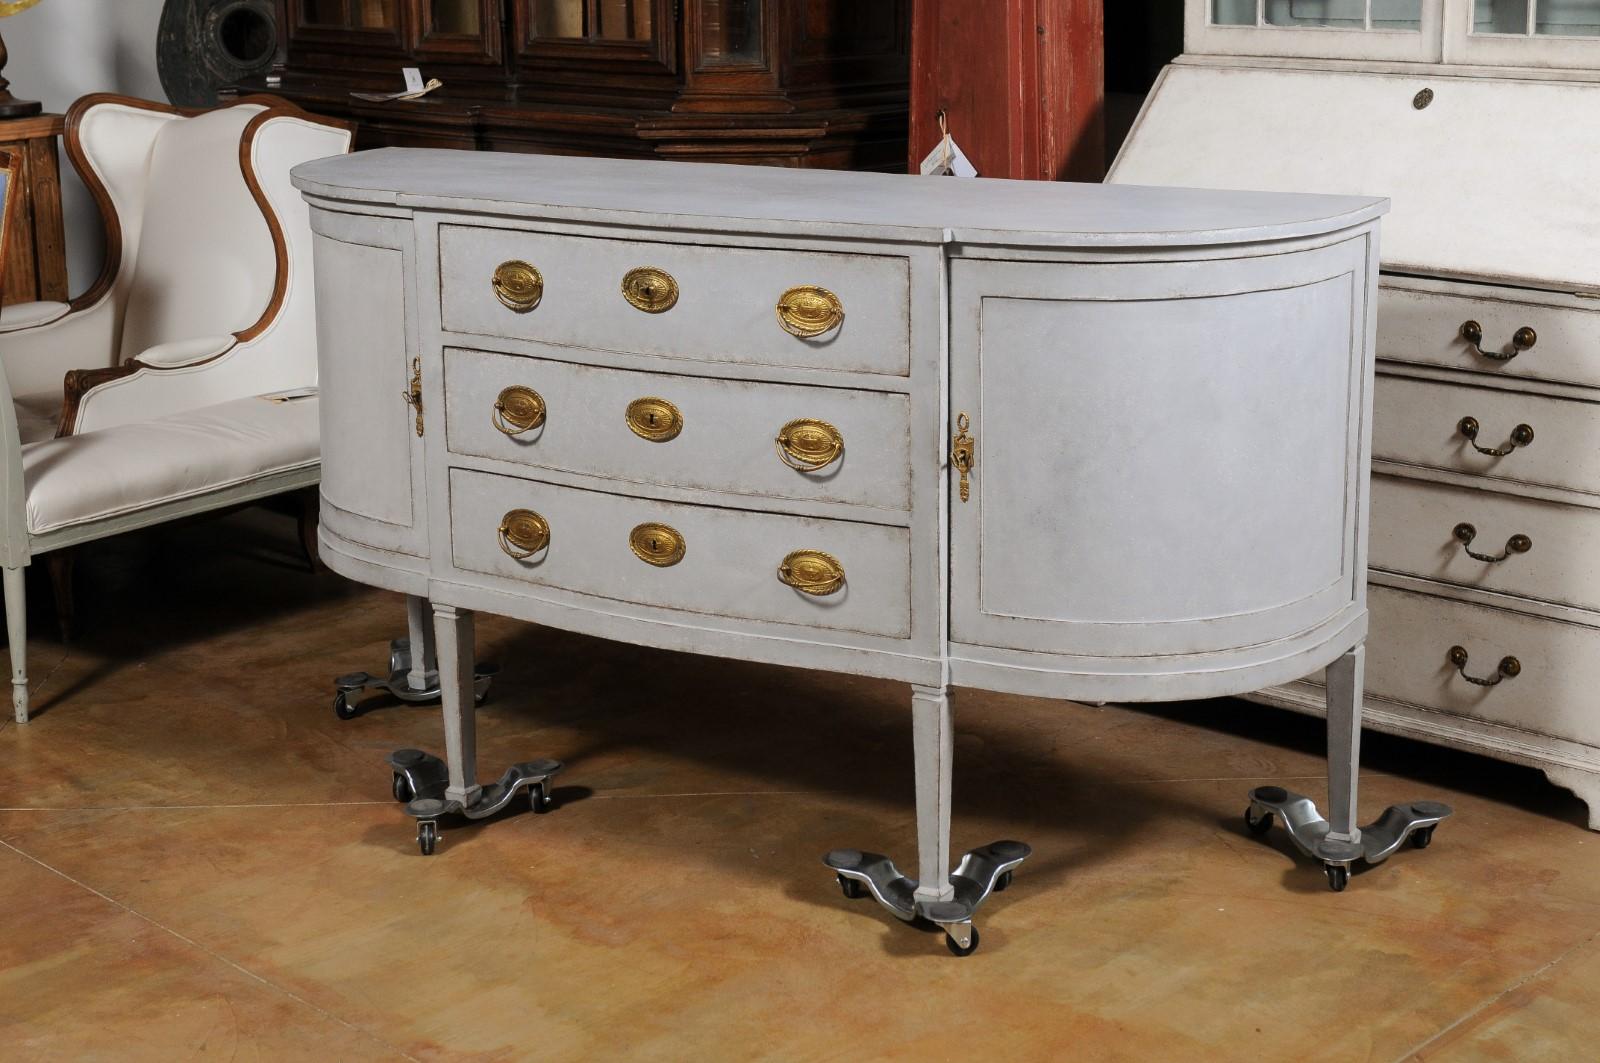 European 1830s Painted Demilune Sideboard with Three Drawers and Rounded Doors For Sale 9